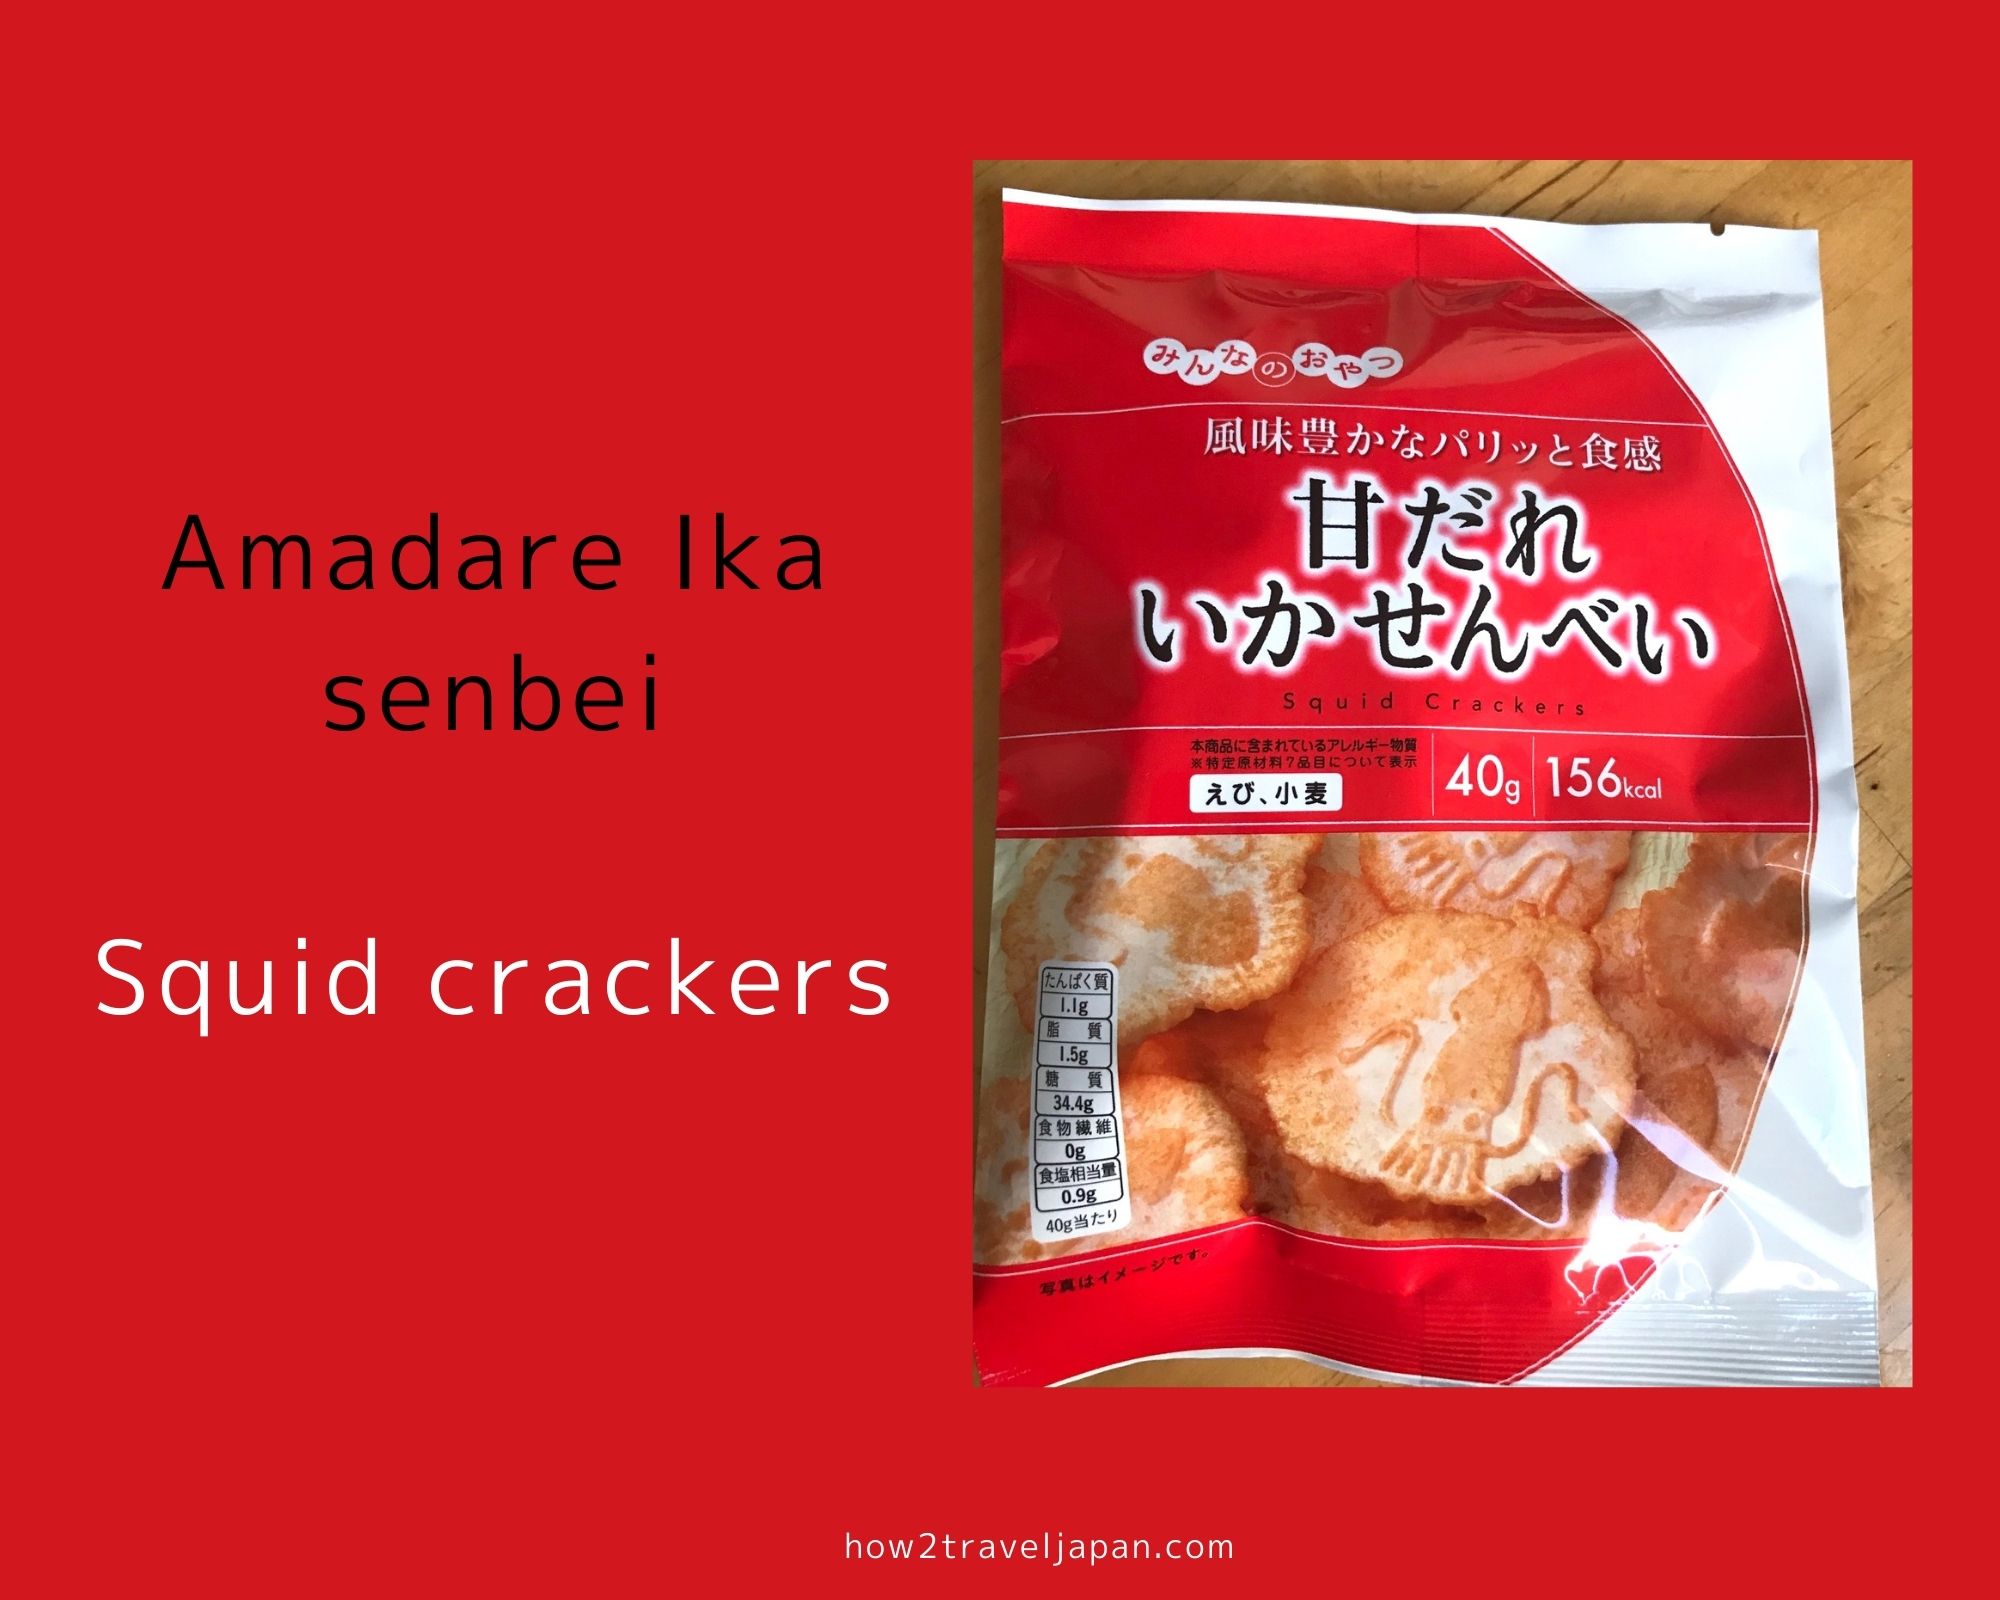 You are currently viewing Amadare Ika senbei from montoile, Squid crackers